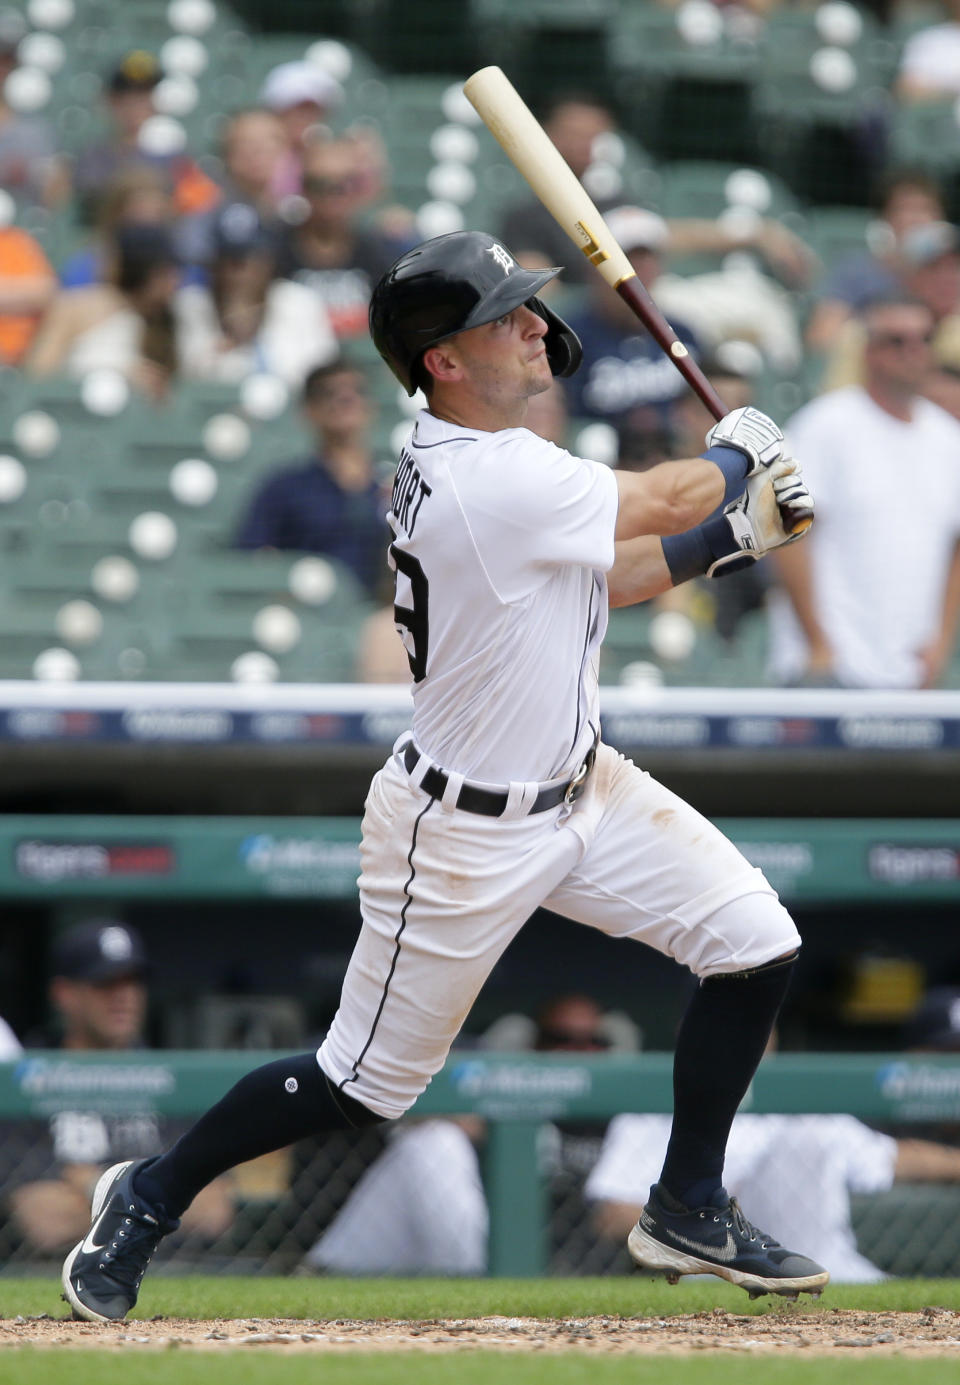 Detroit Tigers' Zack Short hits a two-run home run against the Houston Astros to break a 1-1 tie during the fifth inning of the first baseball game of a doubleheader Saturday, June 26, 2021, in Detroit. The Tigers defeated the Astros 3-1. (AP Photo/Duane Burleson)